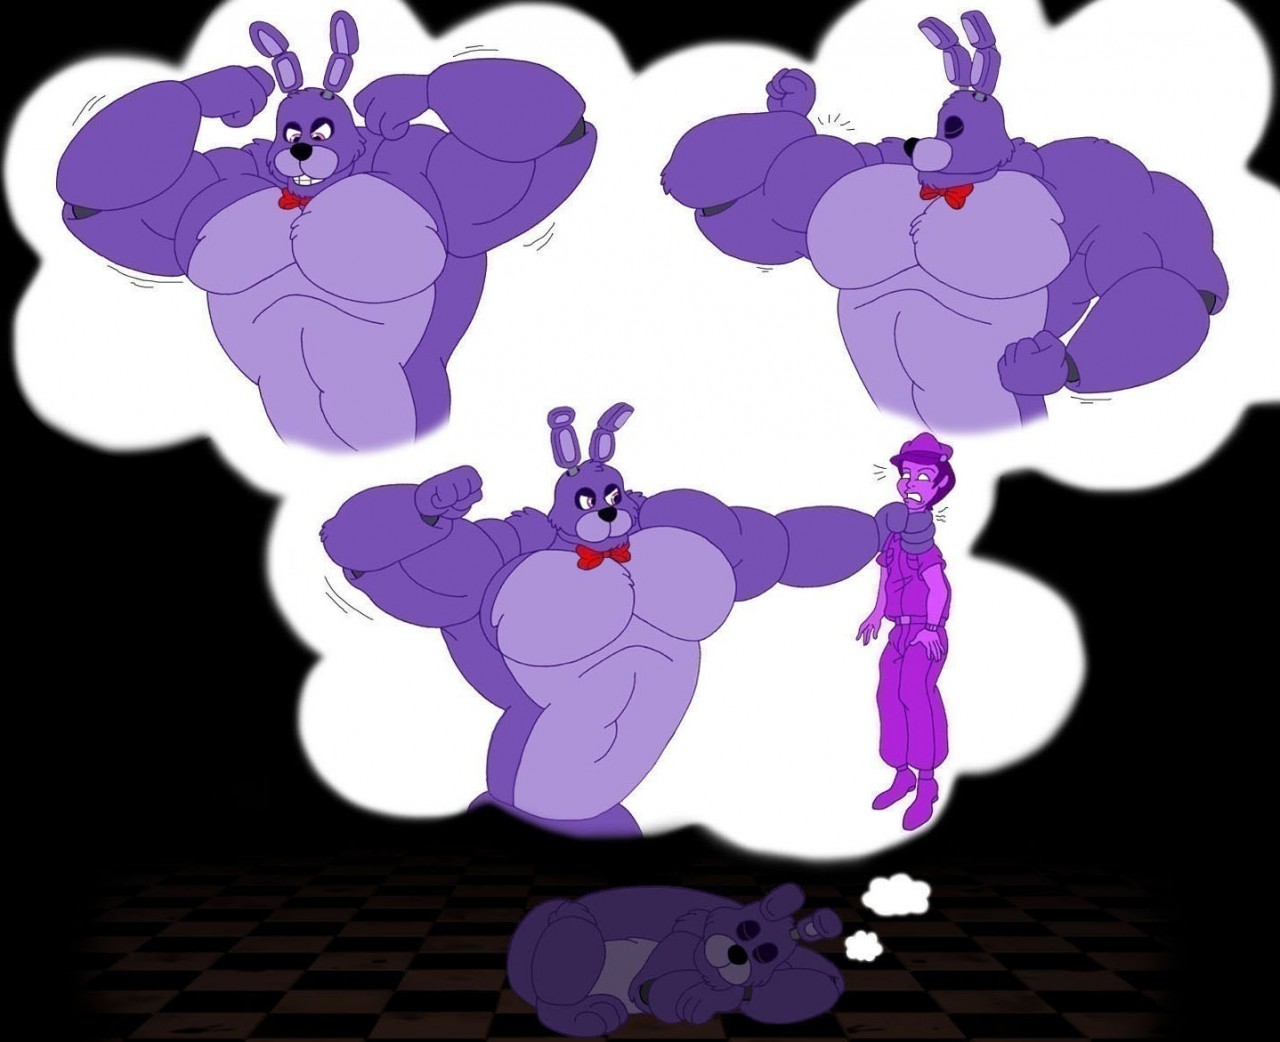 Fnaf muscle growth